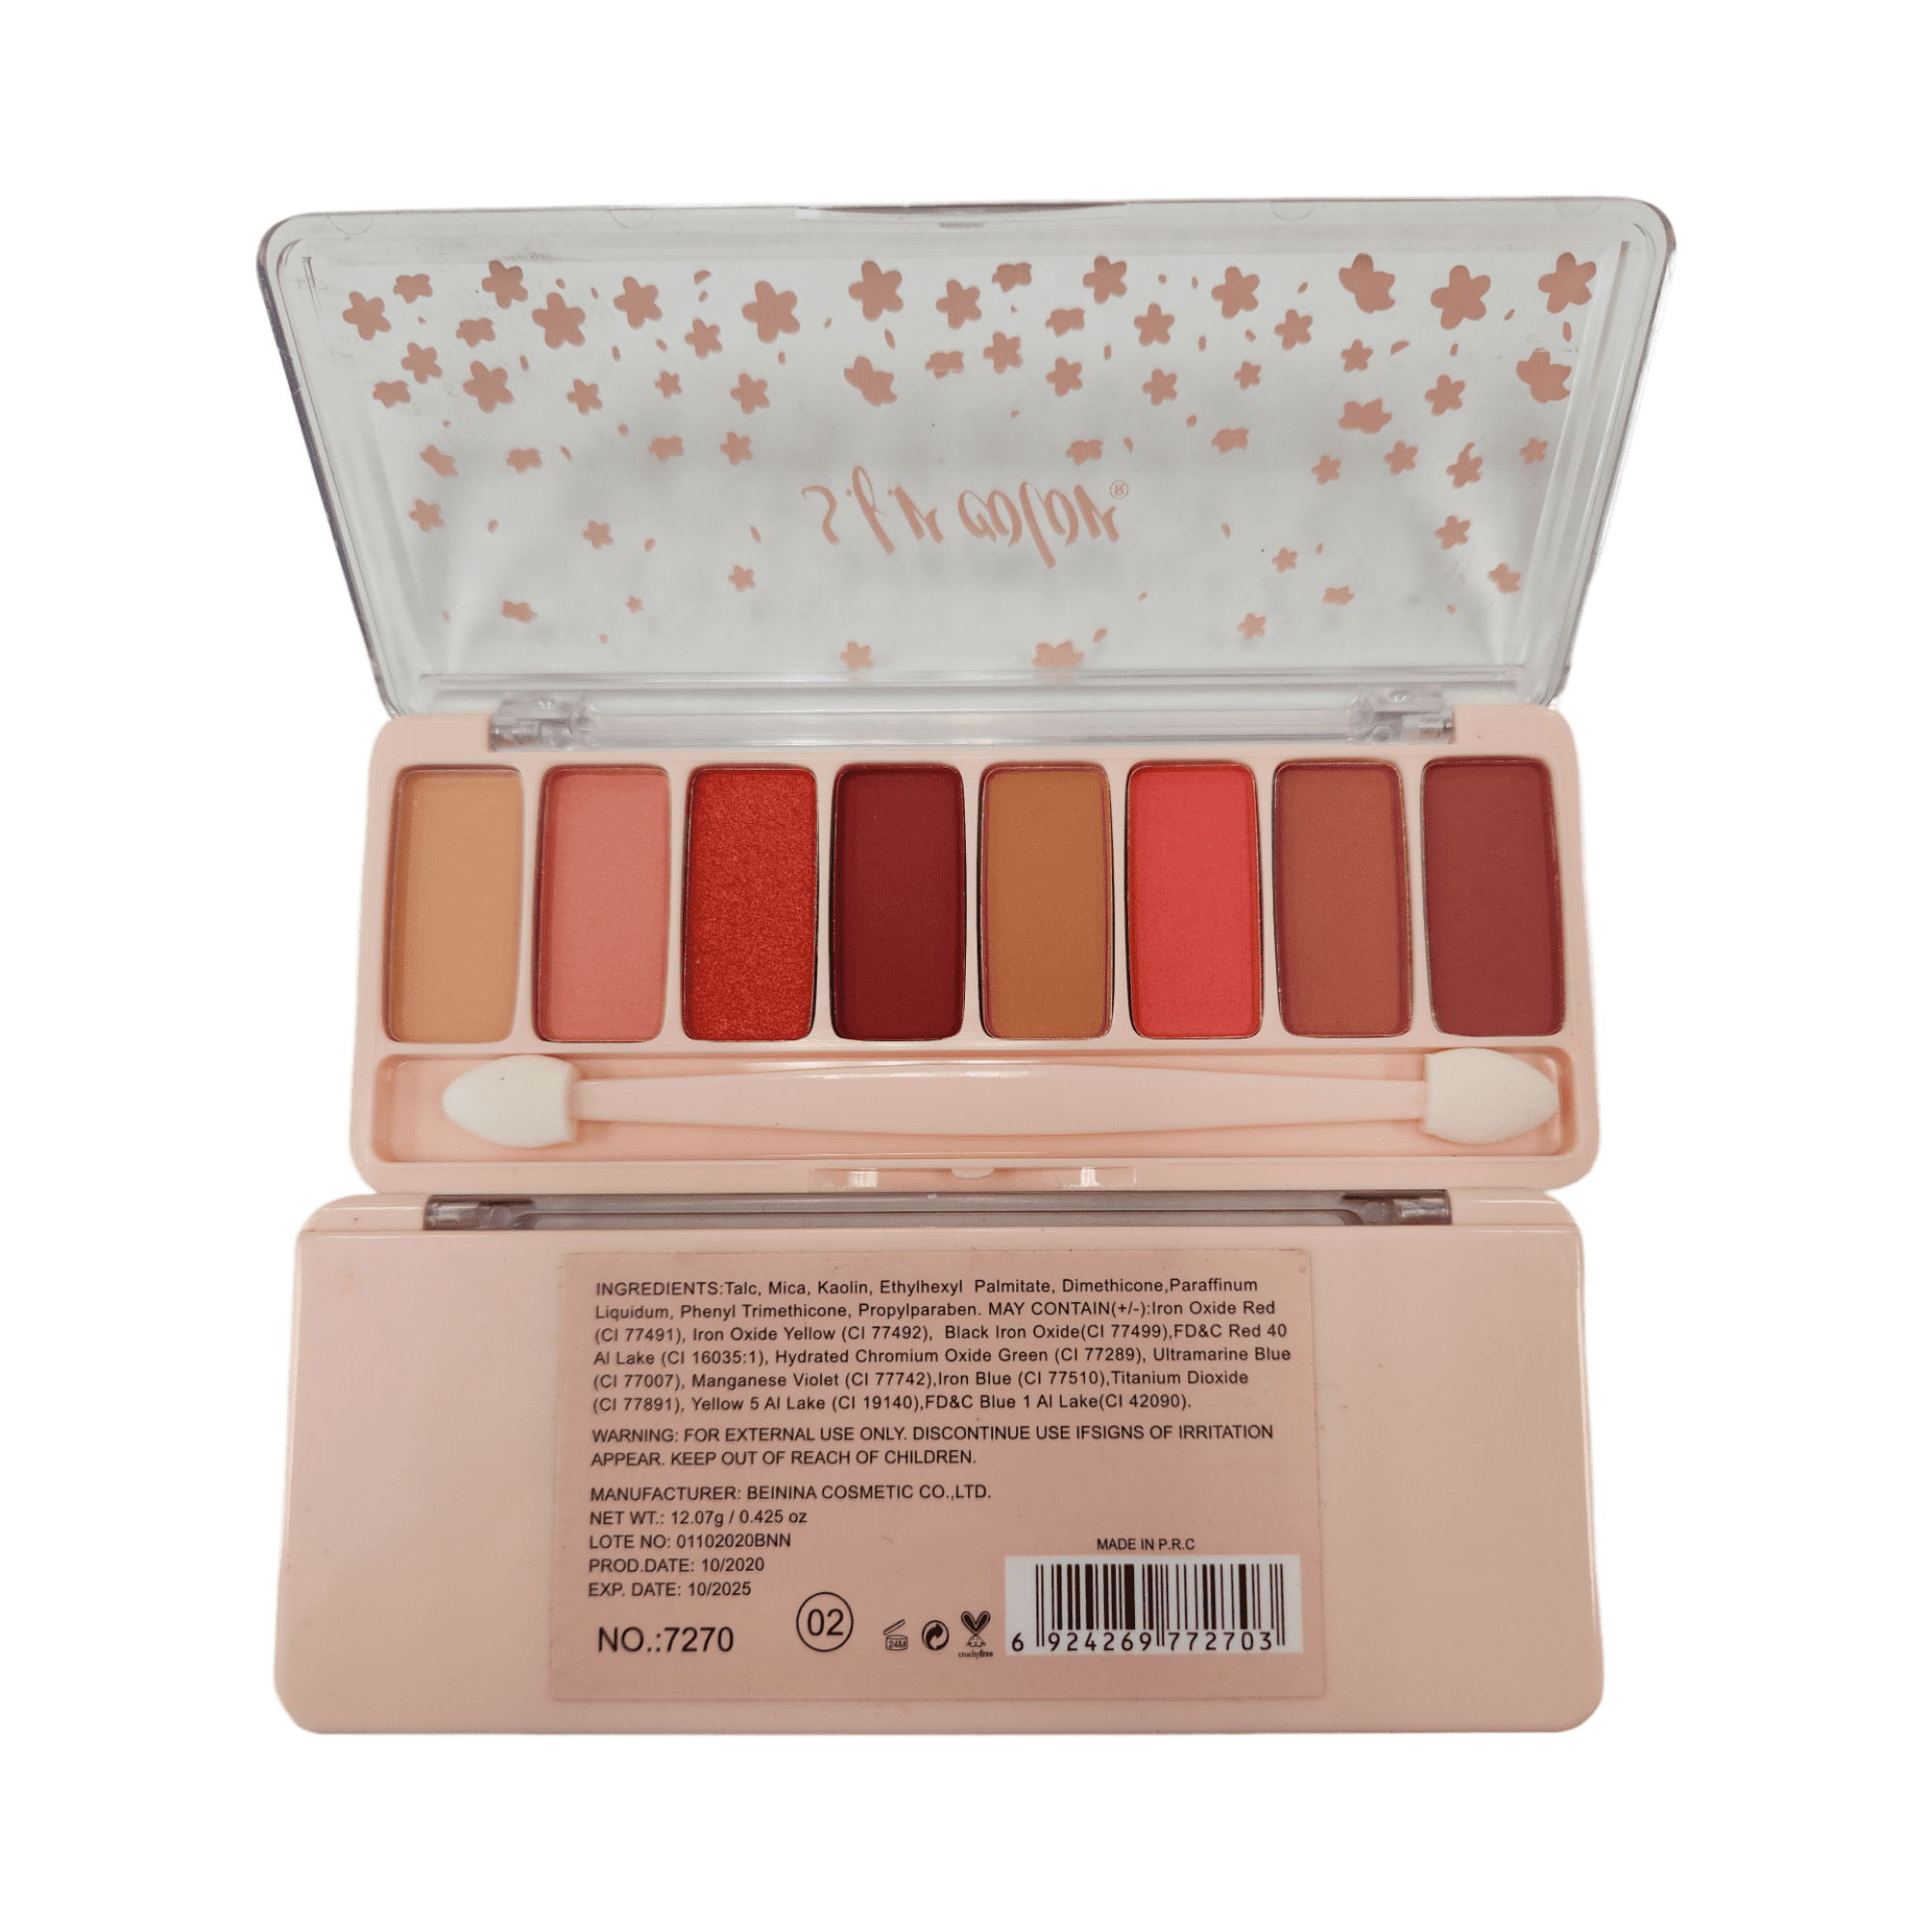 Makeup Revolution Reloaded Palette, Eyeshadow Palette, Includes 15 Shades,  Lasts All Day Long, Cruelty Free, Iconic 3.0, 16.5g